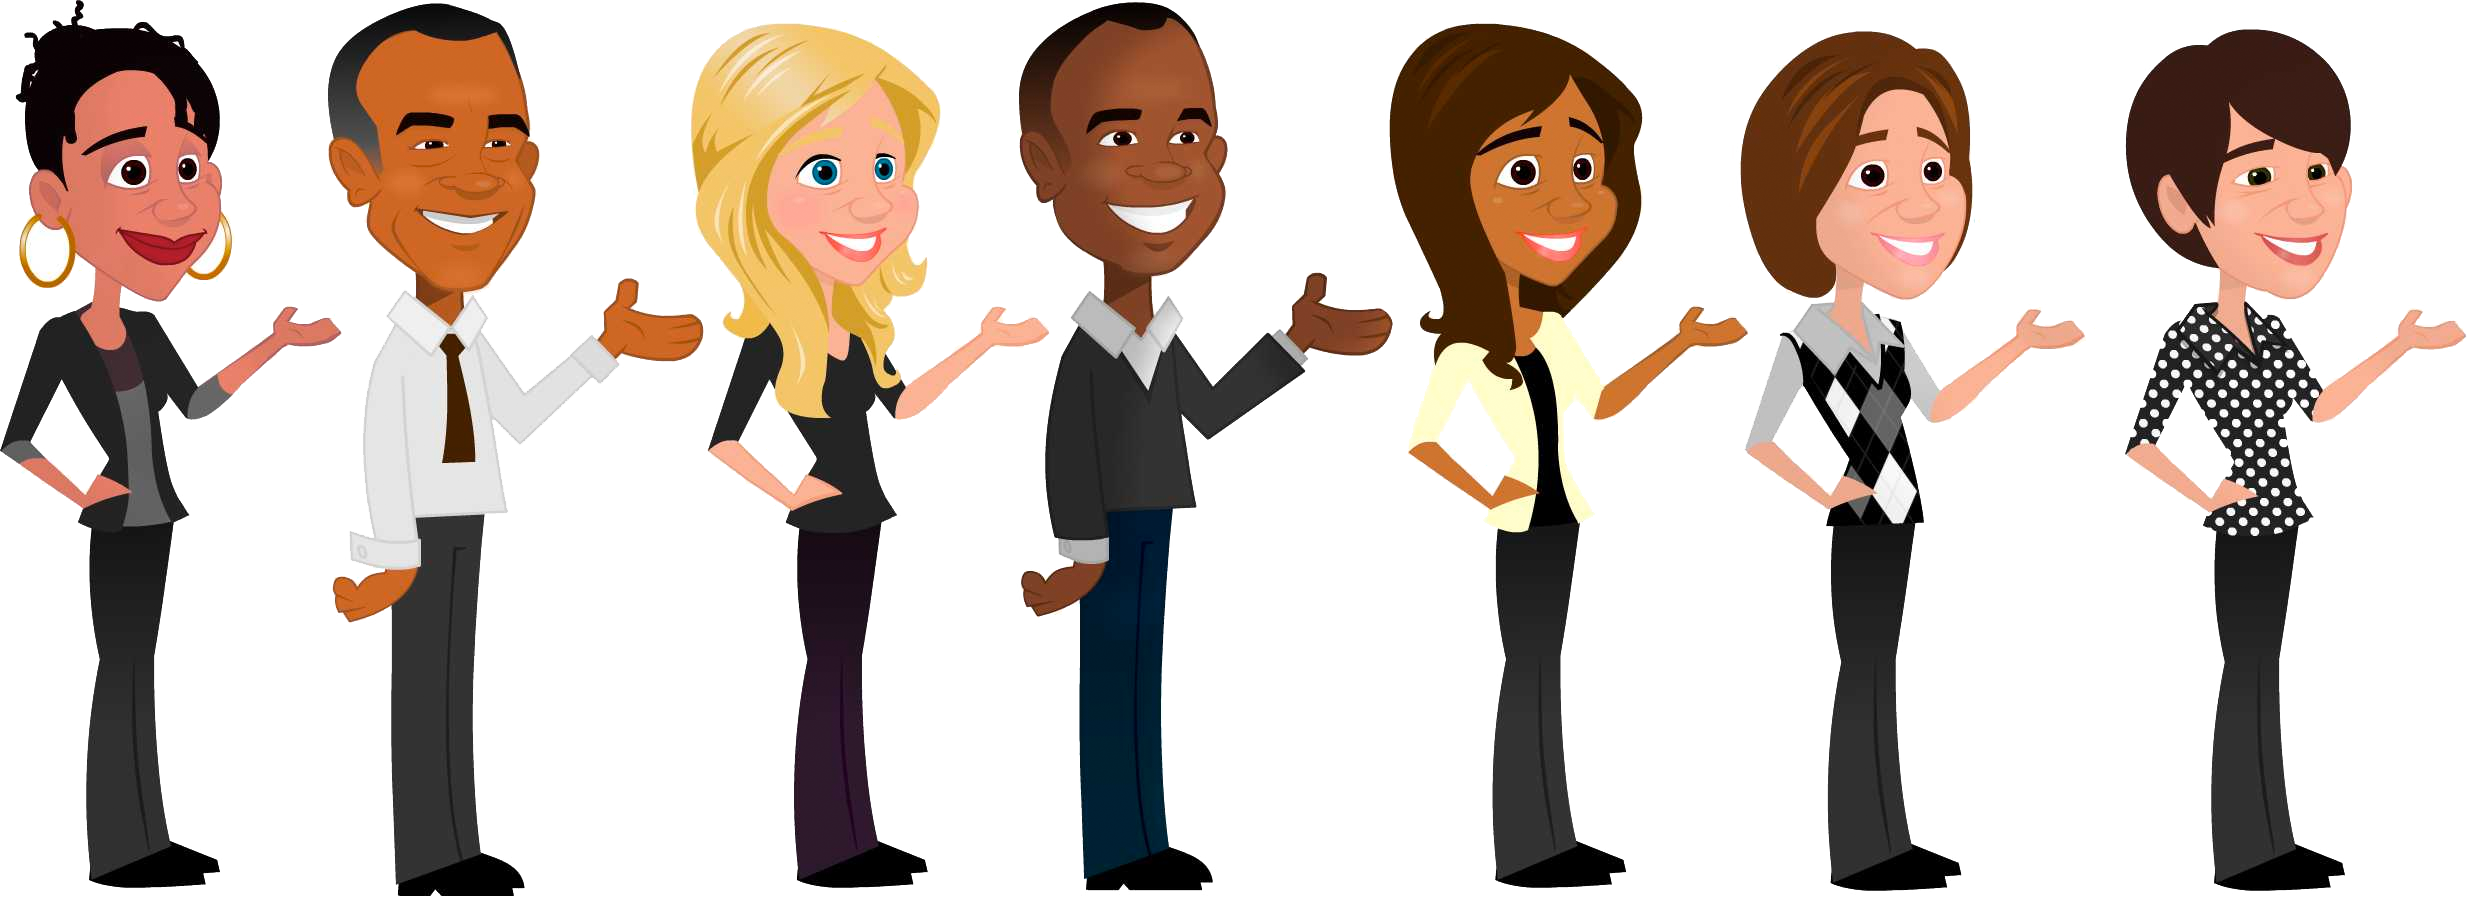 diversity clipart clear background